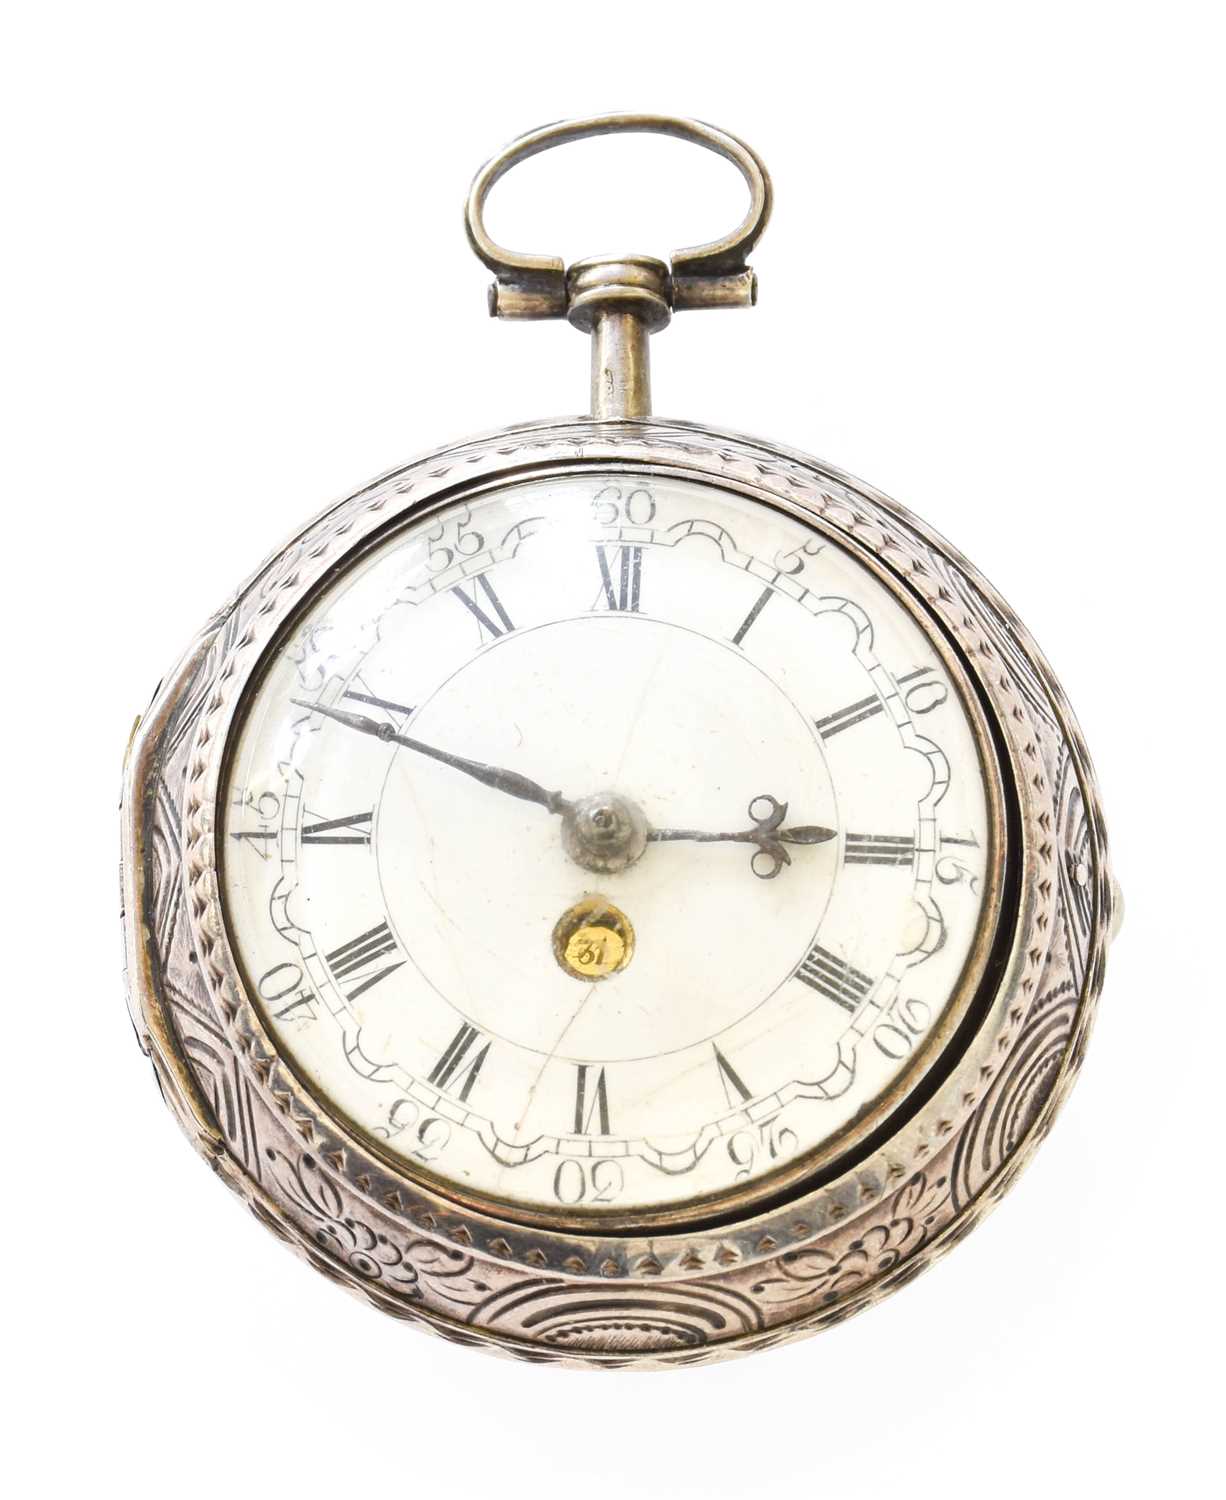 A Silver Pair Cased Repousse Verge Pocket Watch, signed Samson, London, 1781, single chain fusee